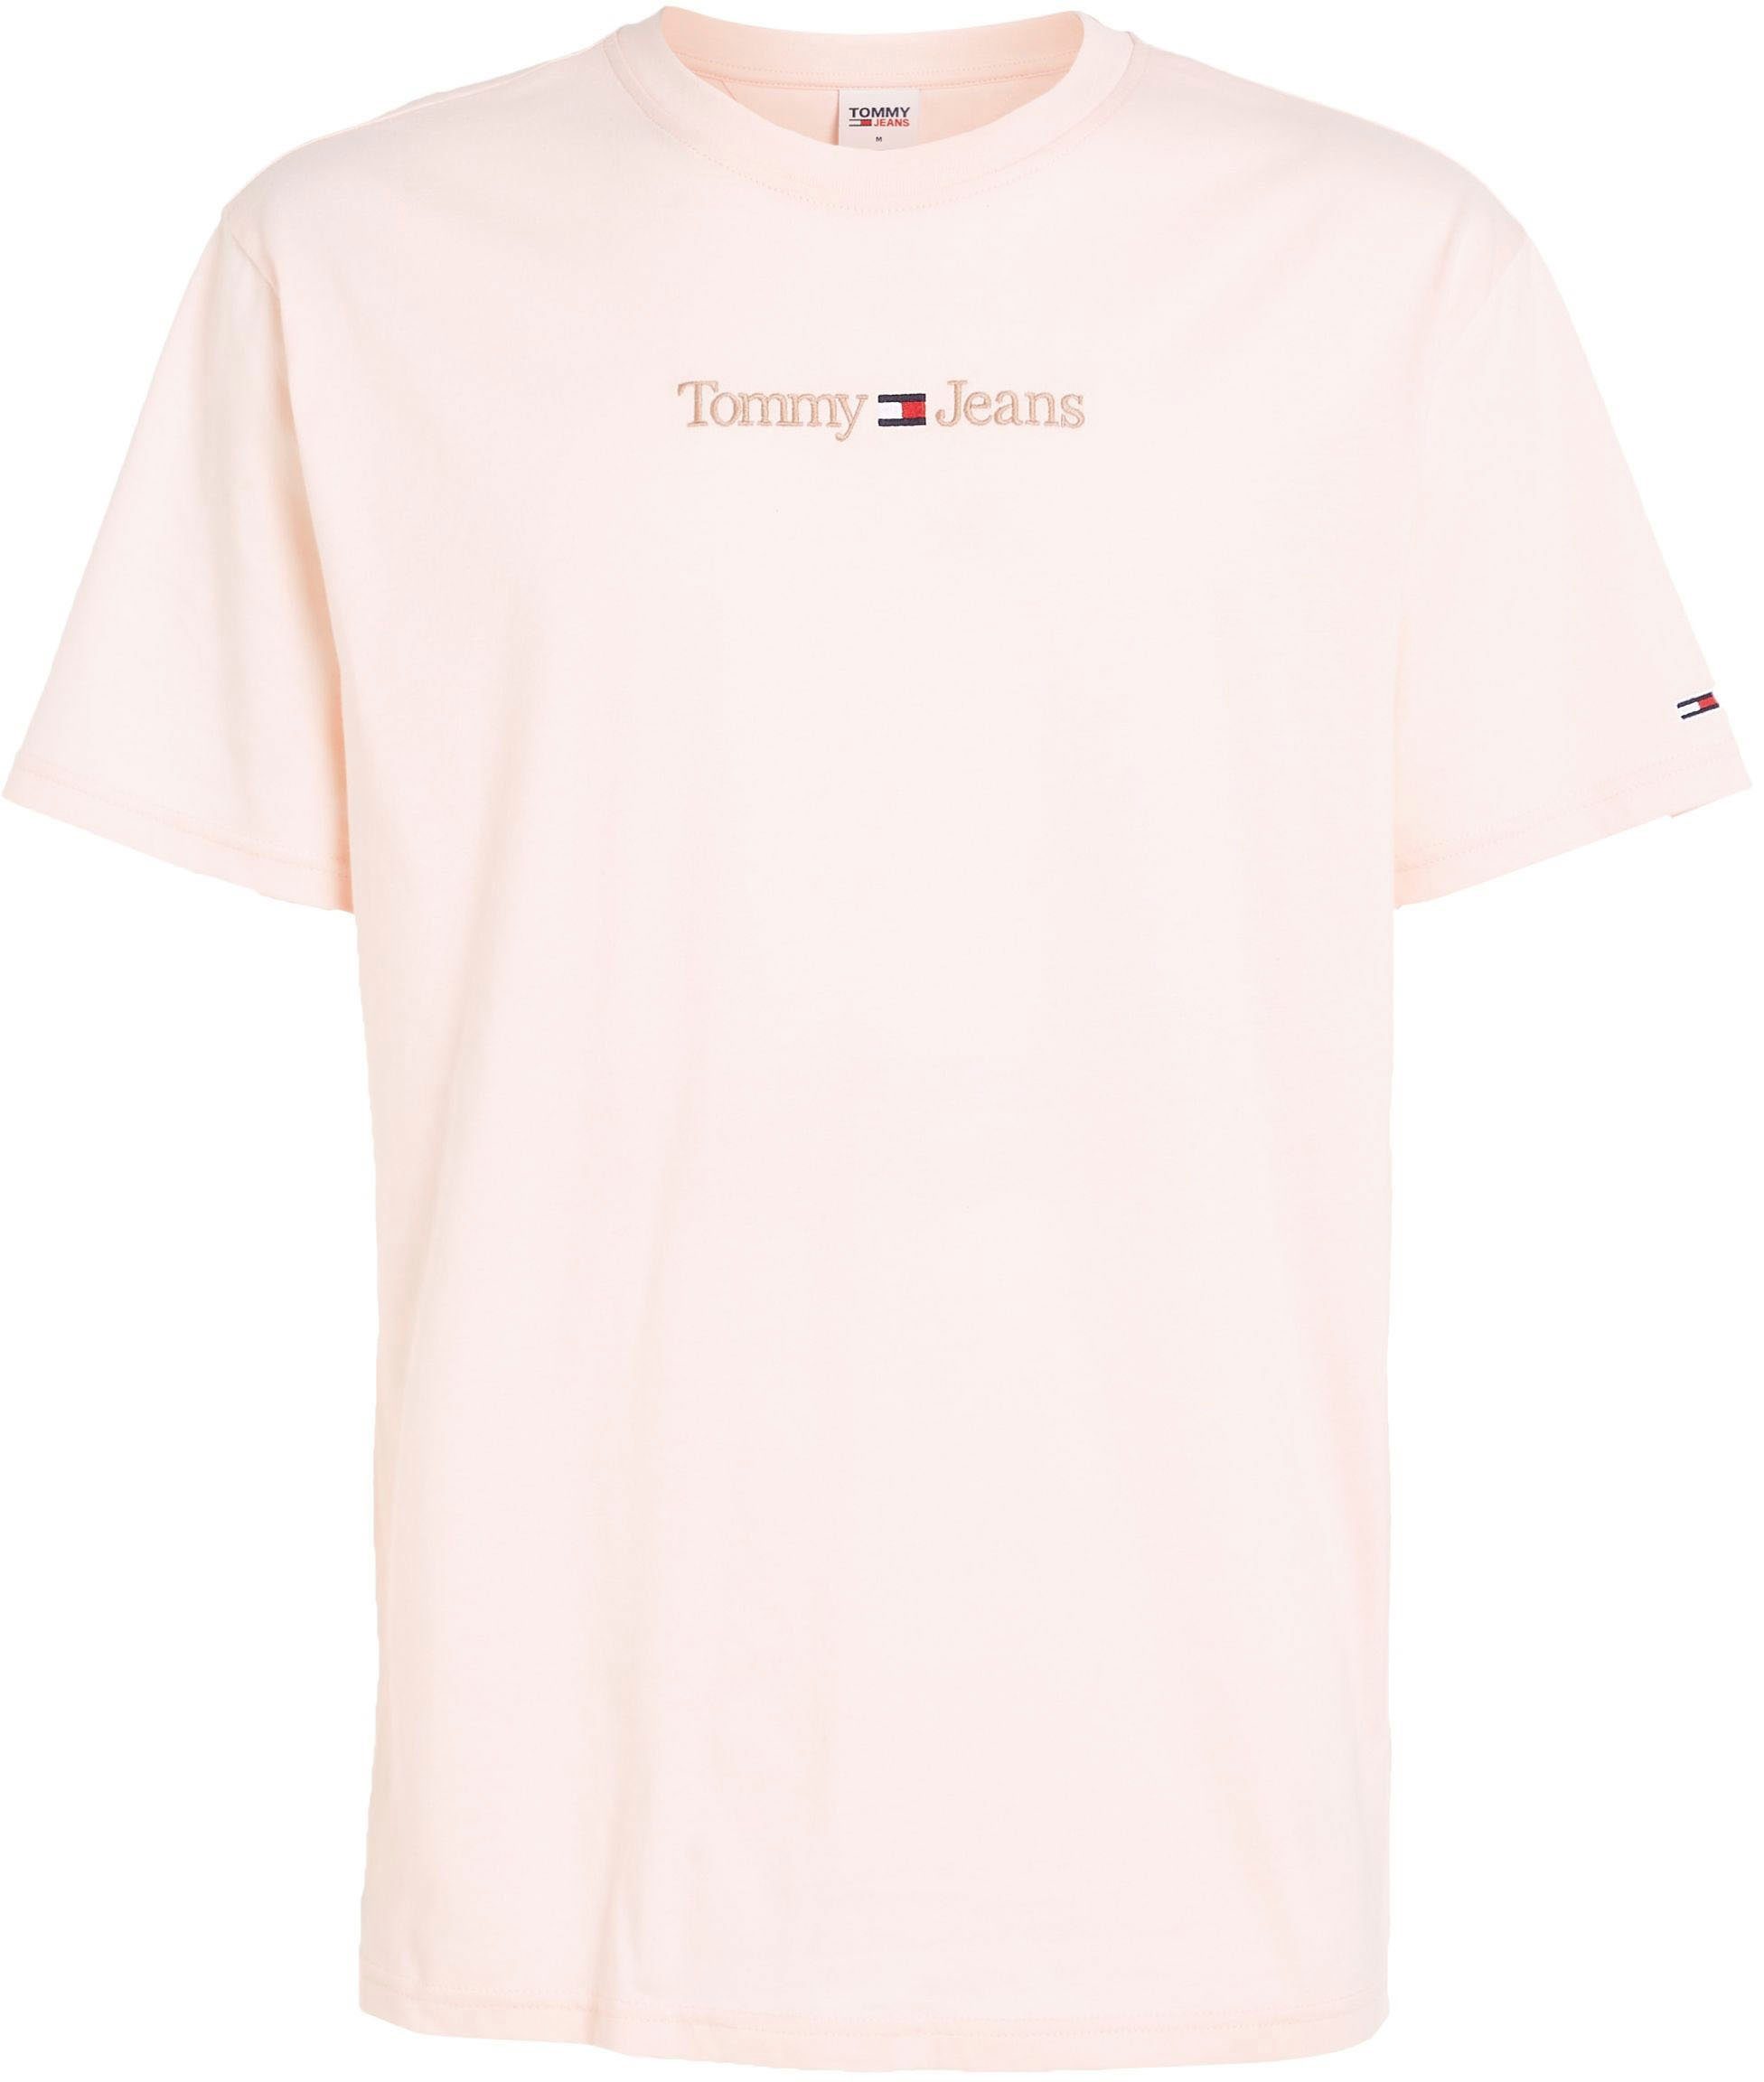 Tommy Jeans T-Shirt TEXT Pink TJM TEE Faint CLSC SMALL